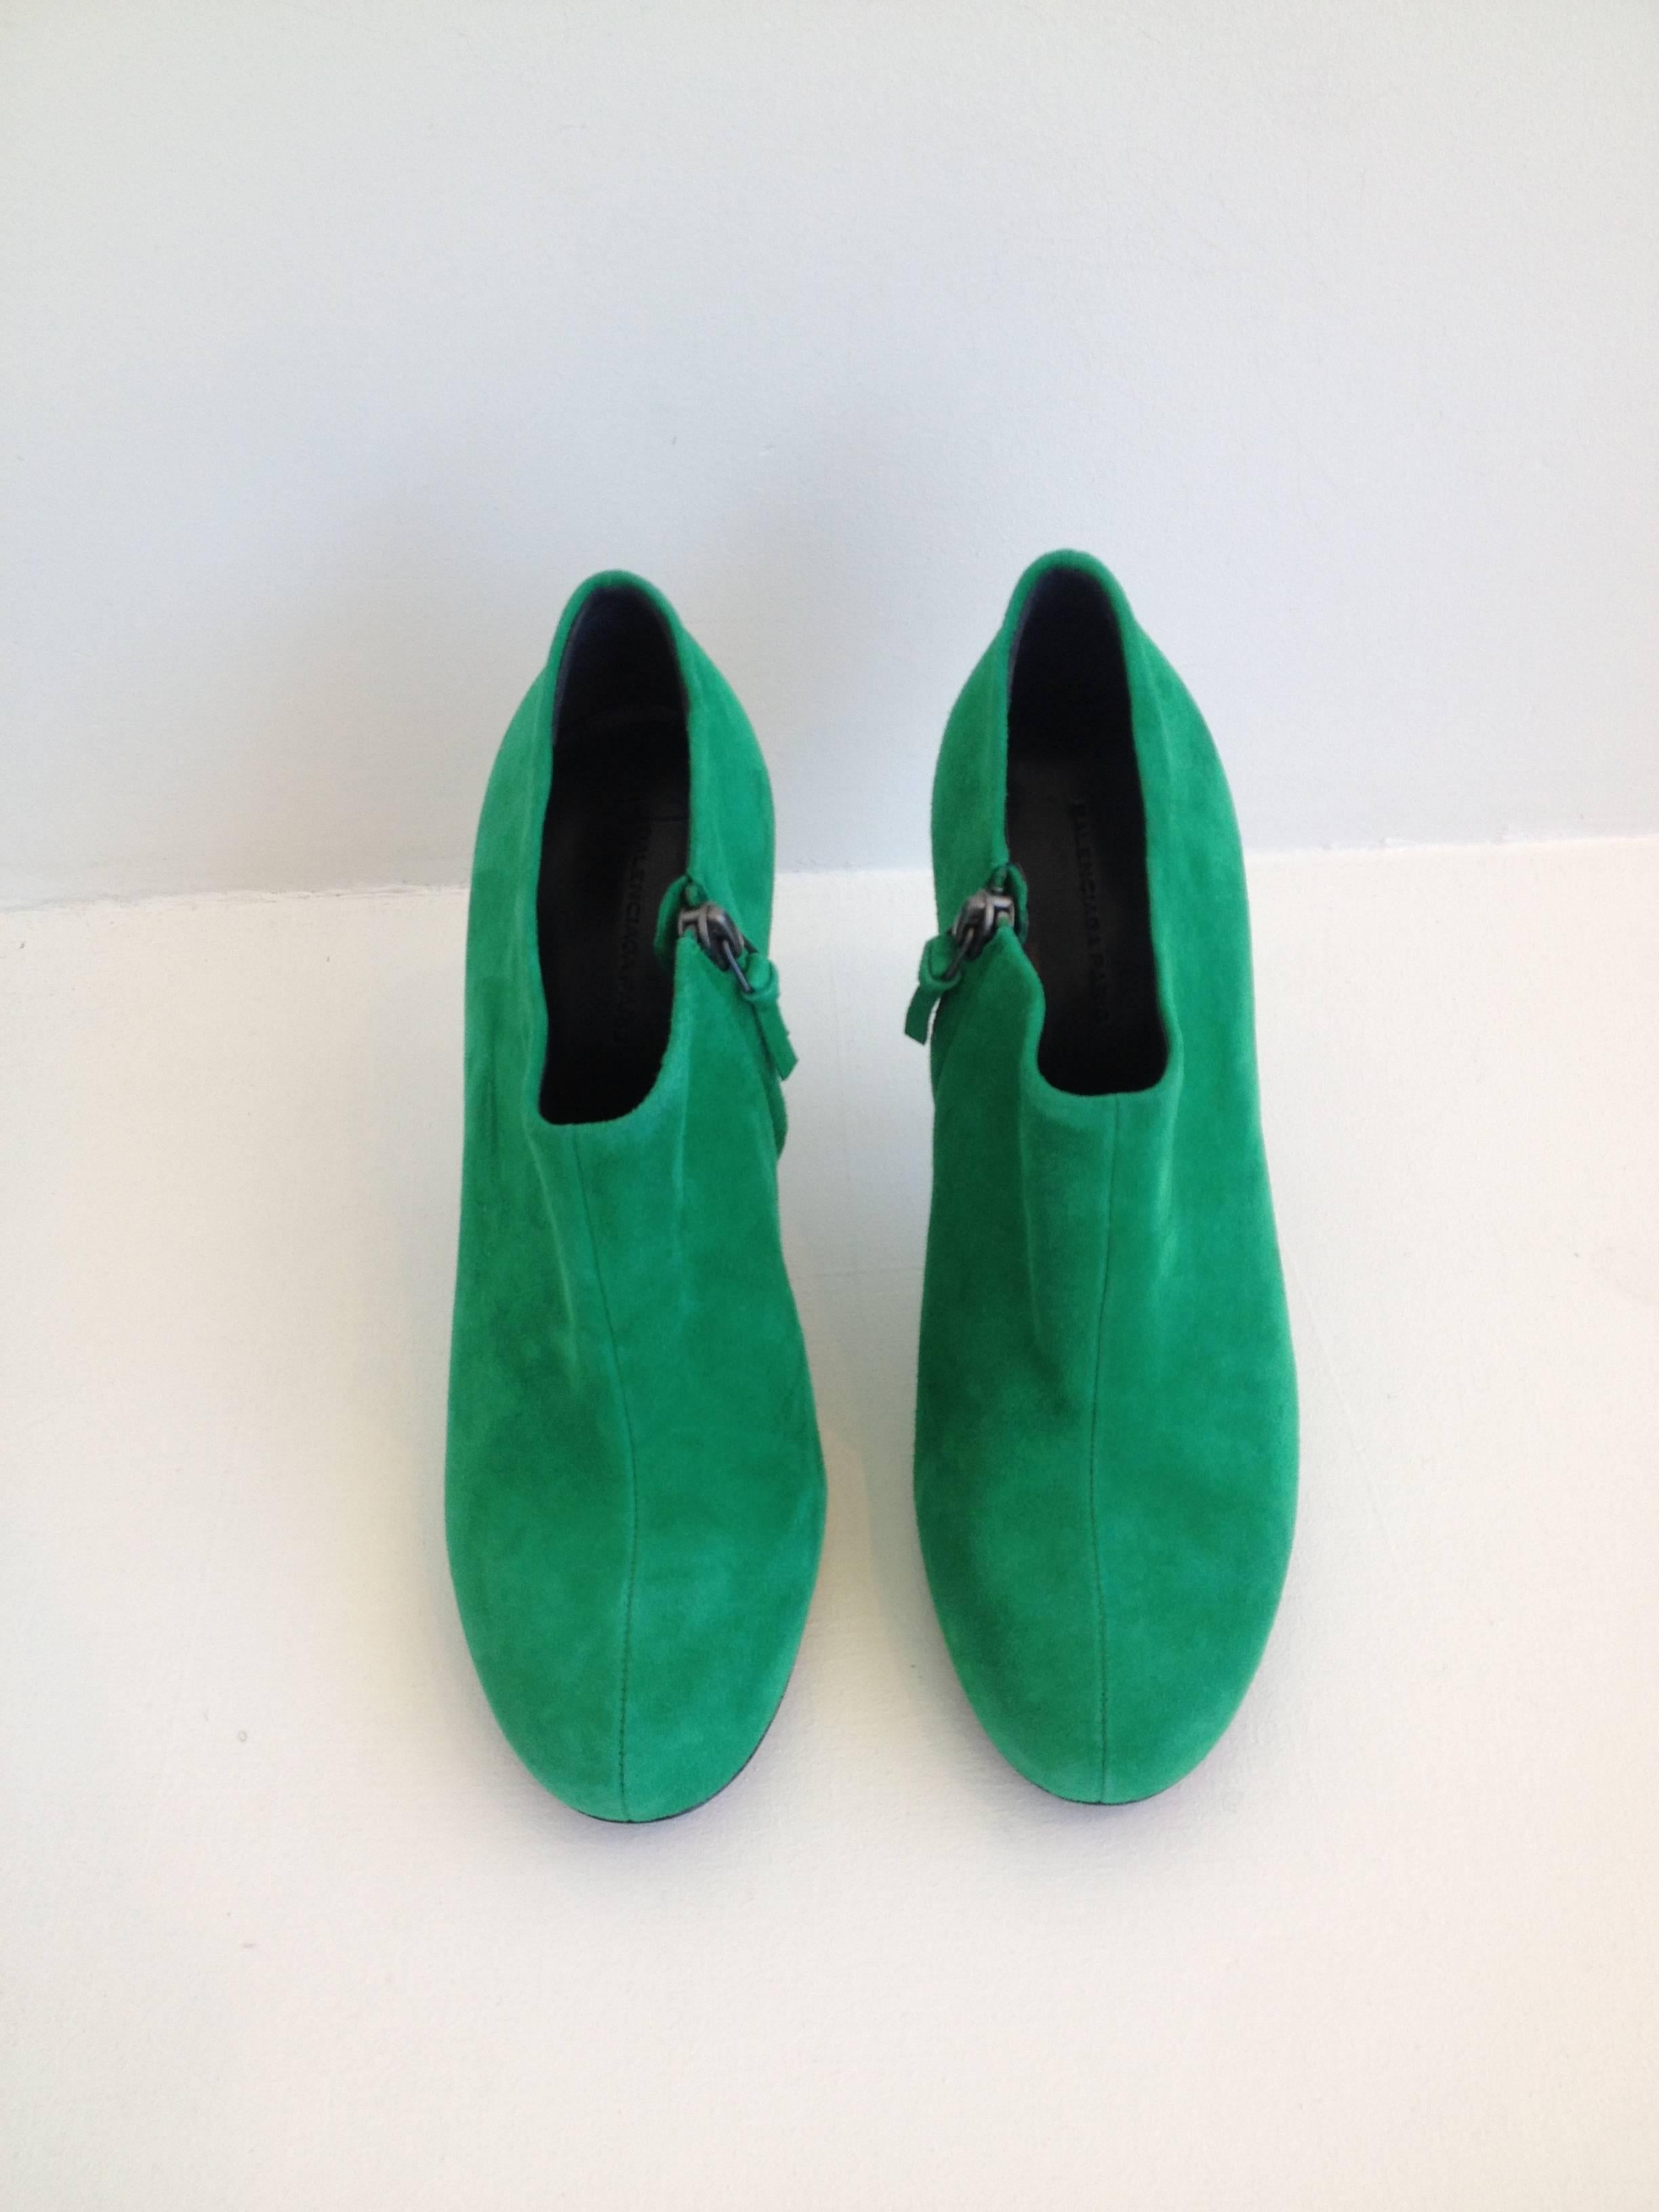 Bright and vibrant color is all you need to leap forward into spring. This pair by Balenciaga is fabulous - the exterior is made from a super saturated kelly green suede, perfect for adding a pop of color to any look. The 3.75 inch heel is covered